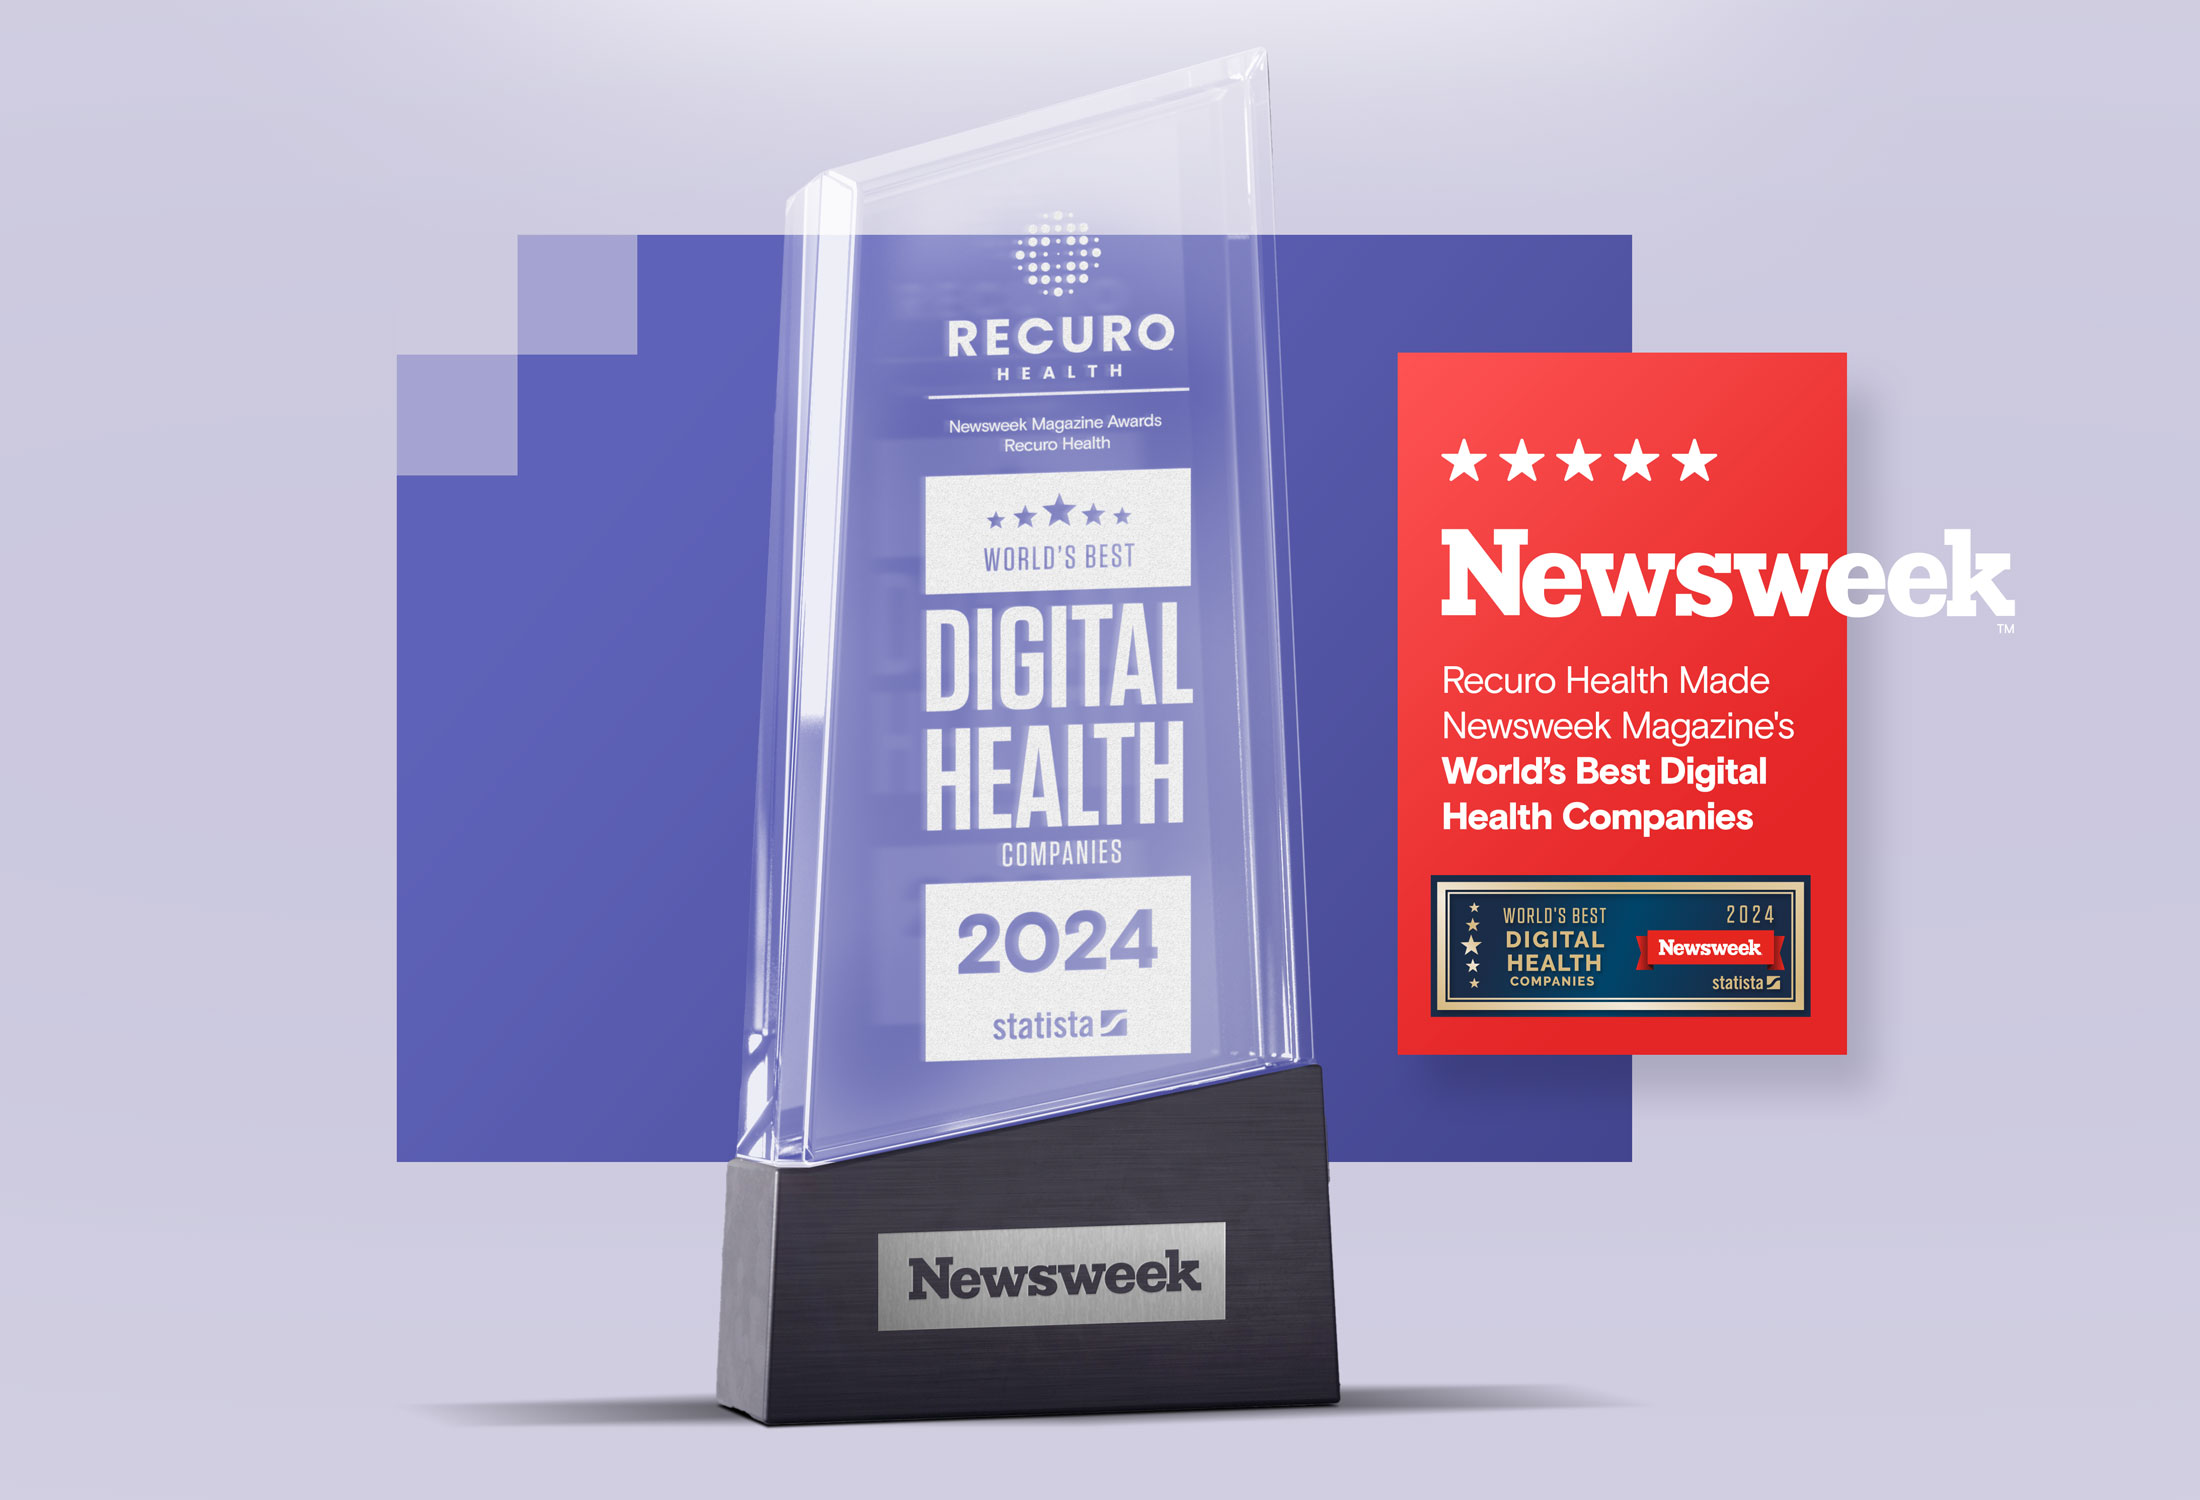 Newsweek Recognizes Recuro as One of the World's Best Digital Health Companies